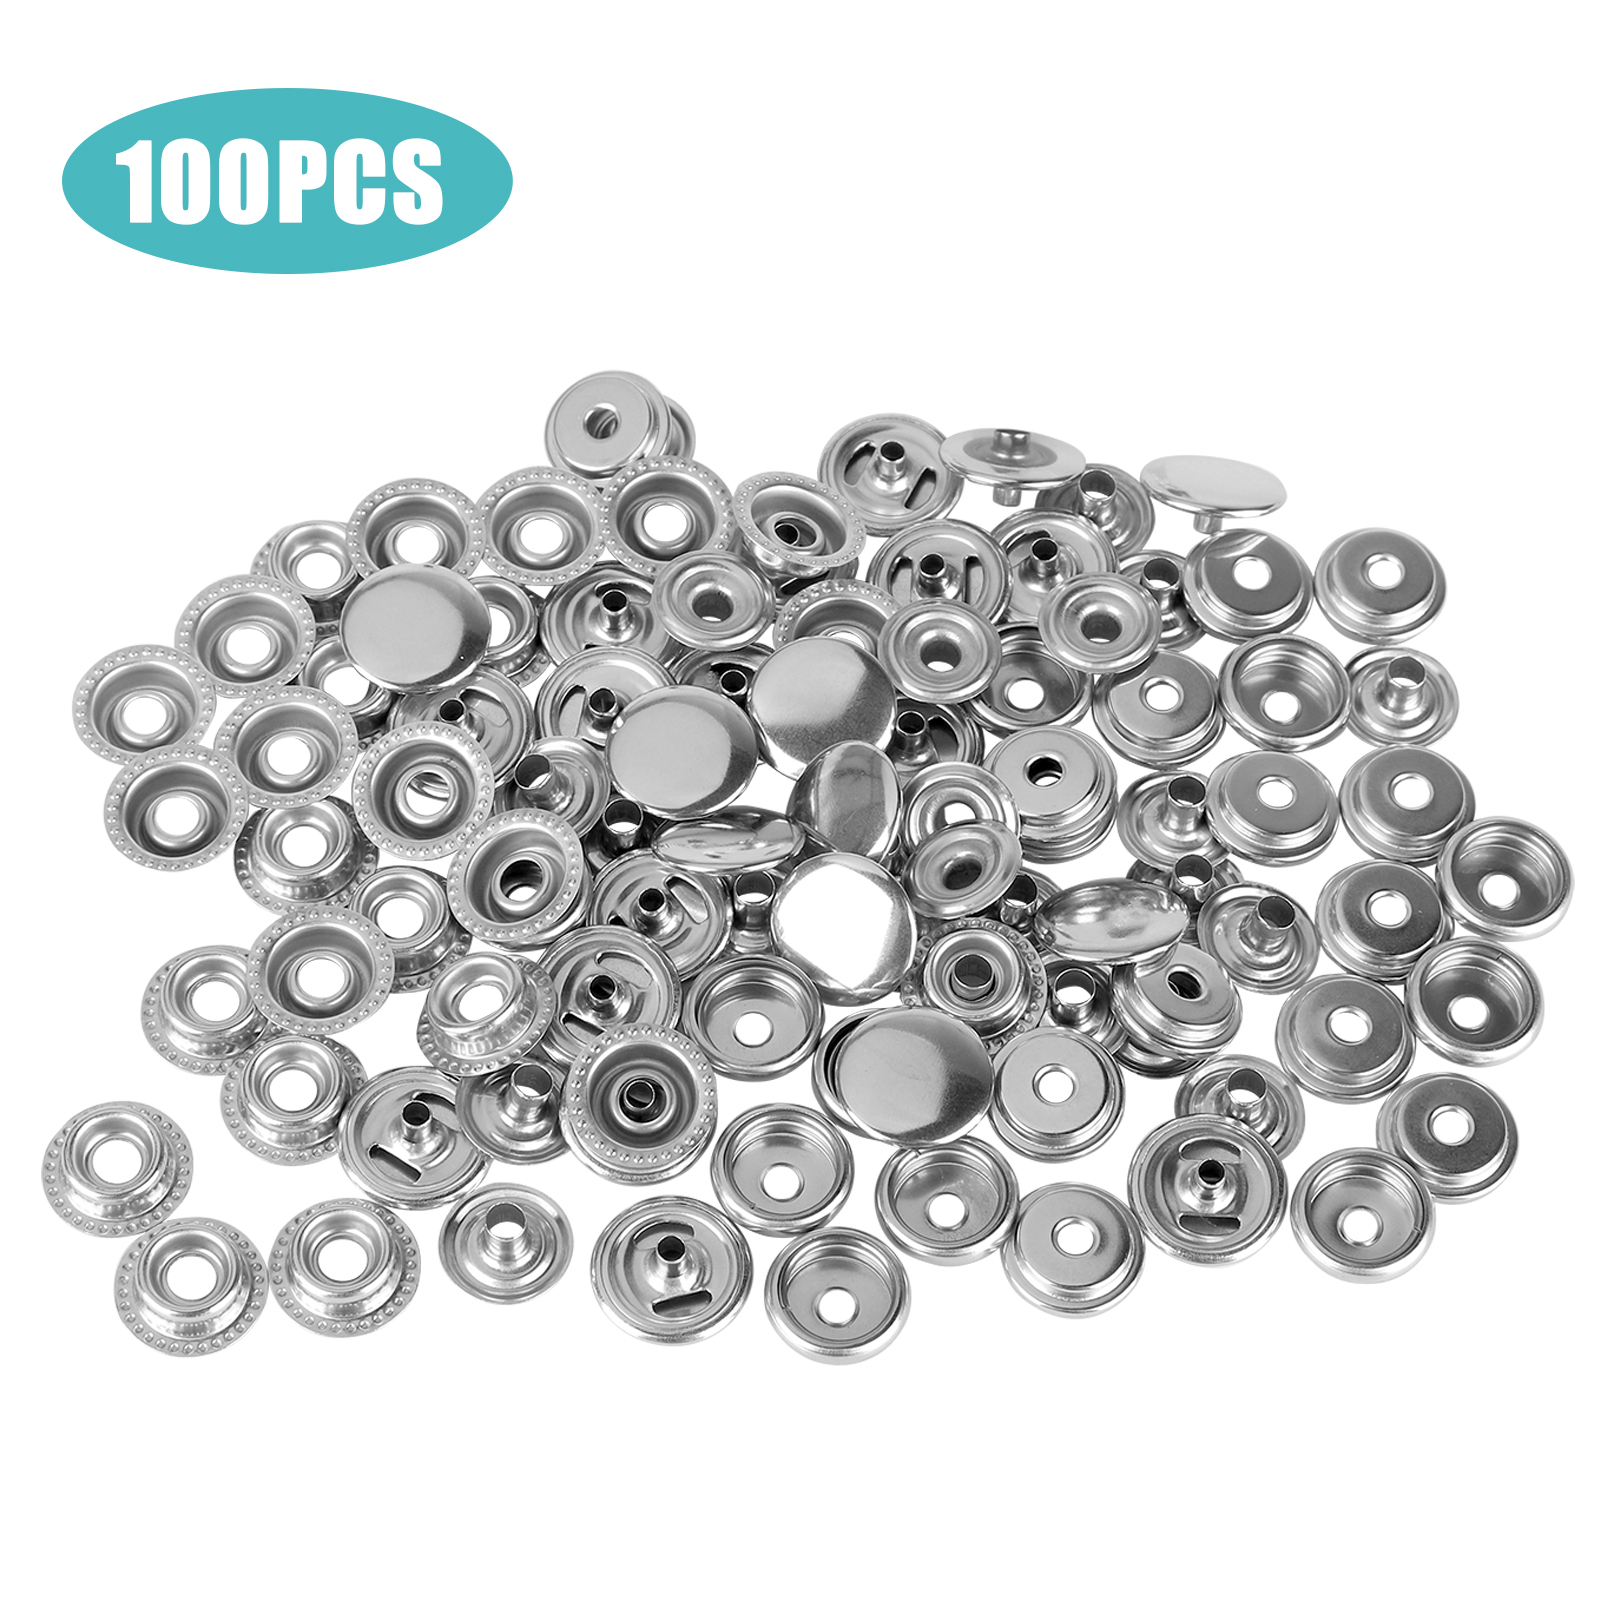 104pcs 15MM Plated Steel Snaps Fastener Snap Press Stud Cap Button Marine Boat Canvas Gunmetal Black 4 Components, 26pcs for Each 